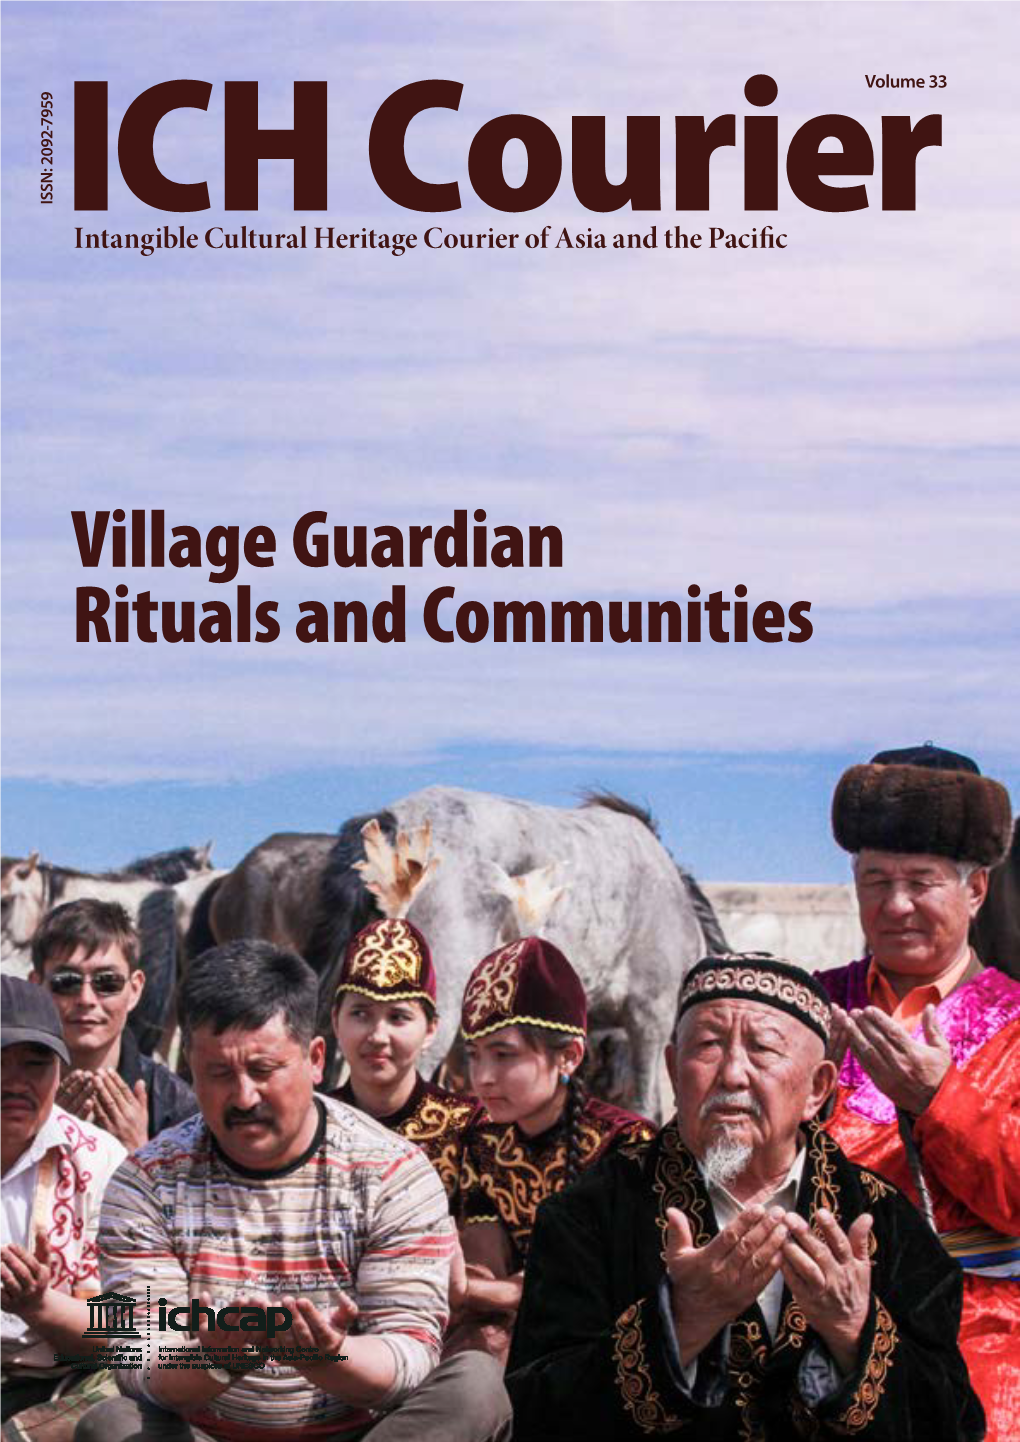 Village Guardian Rituals and Communities Contents Editorial Remarks Volume 33 Kwon Huh Director-General of ICHCAP